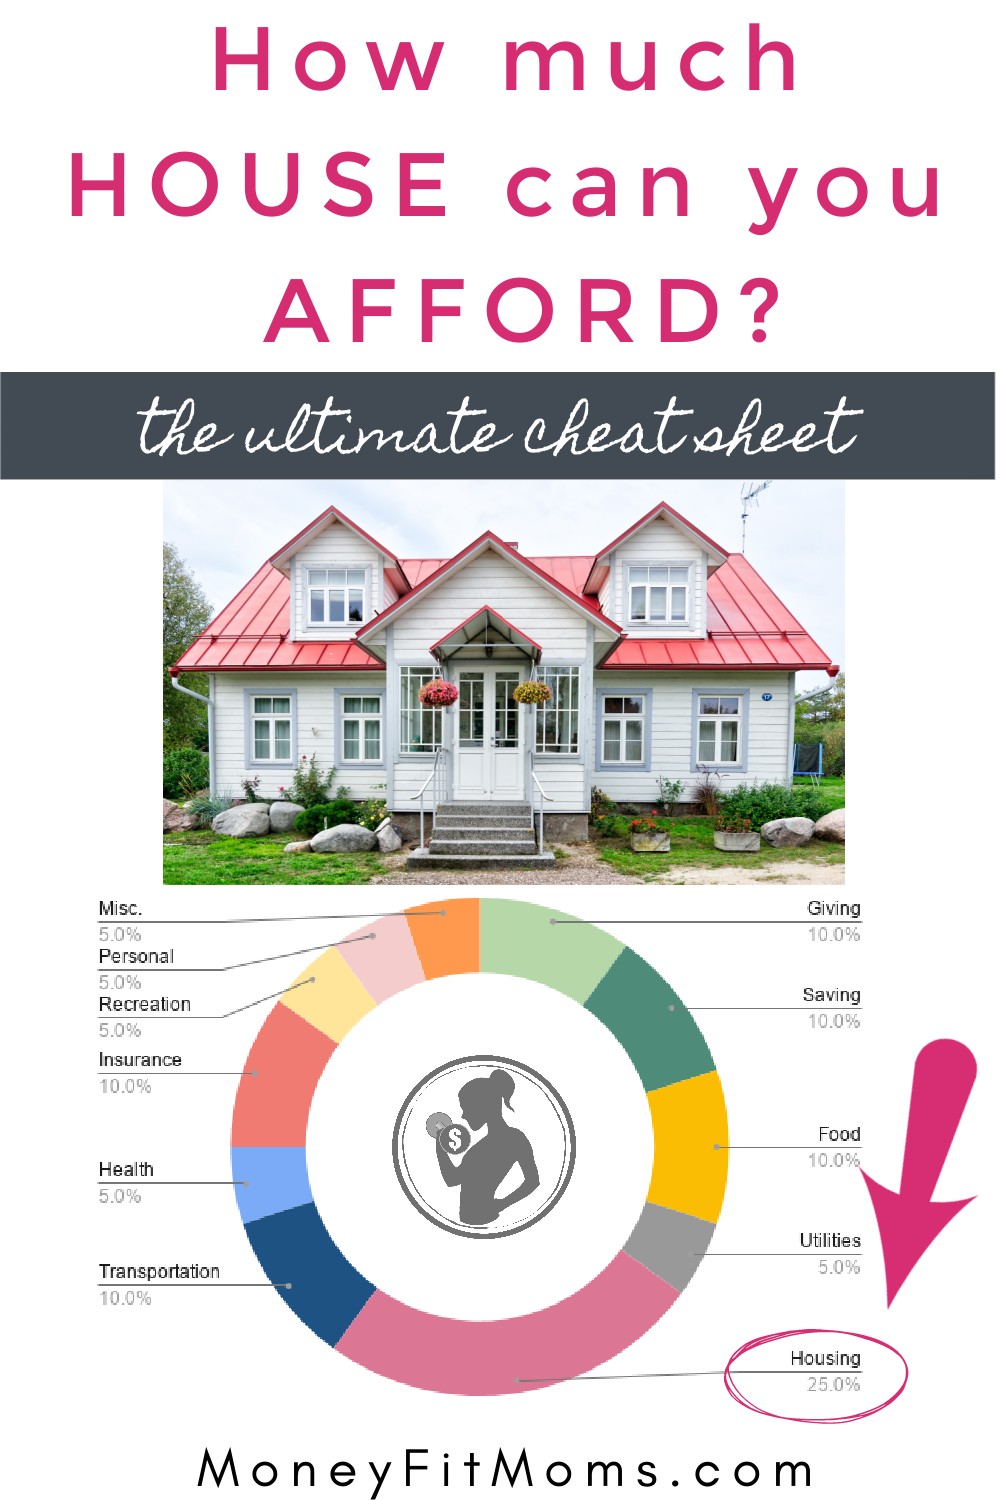 How much house can you afford?